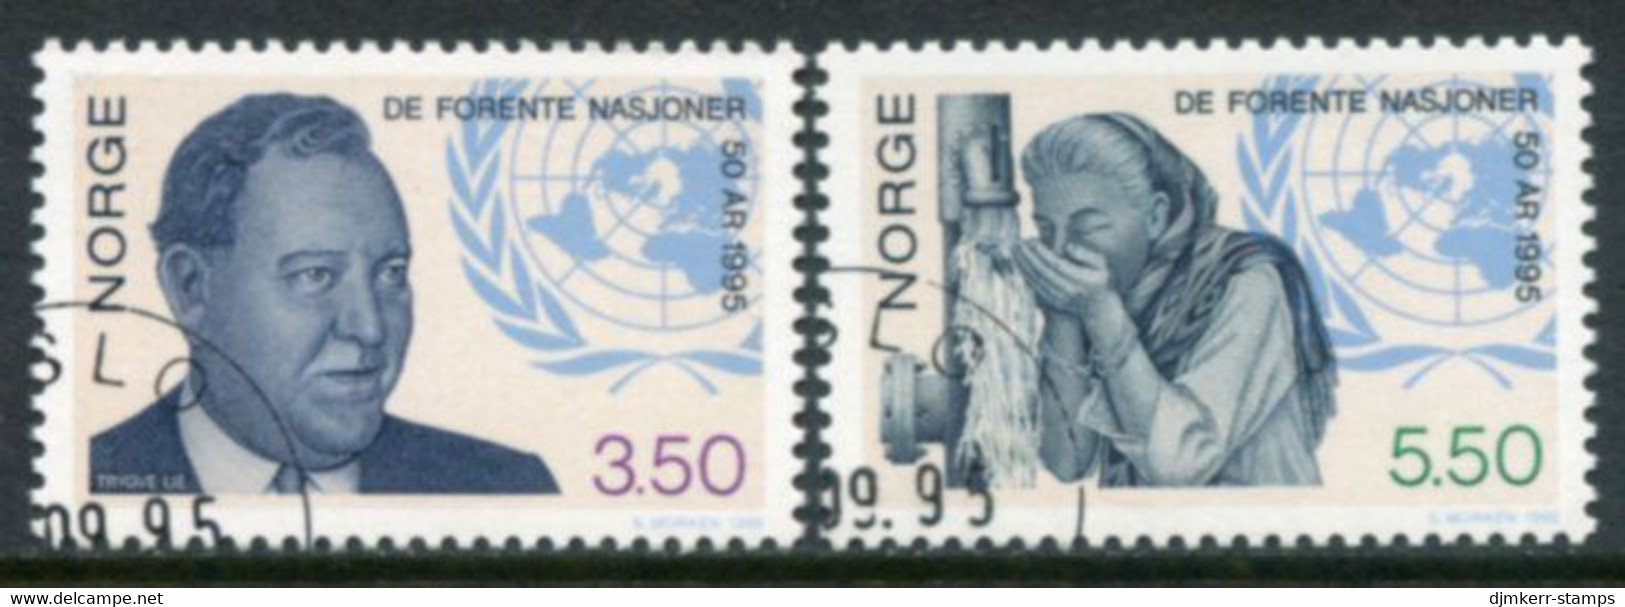 NORWAY 1995 50th Anniversary Of UNO Used.   Michel 1187-88 - Usados